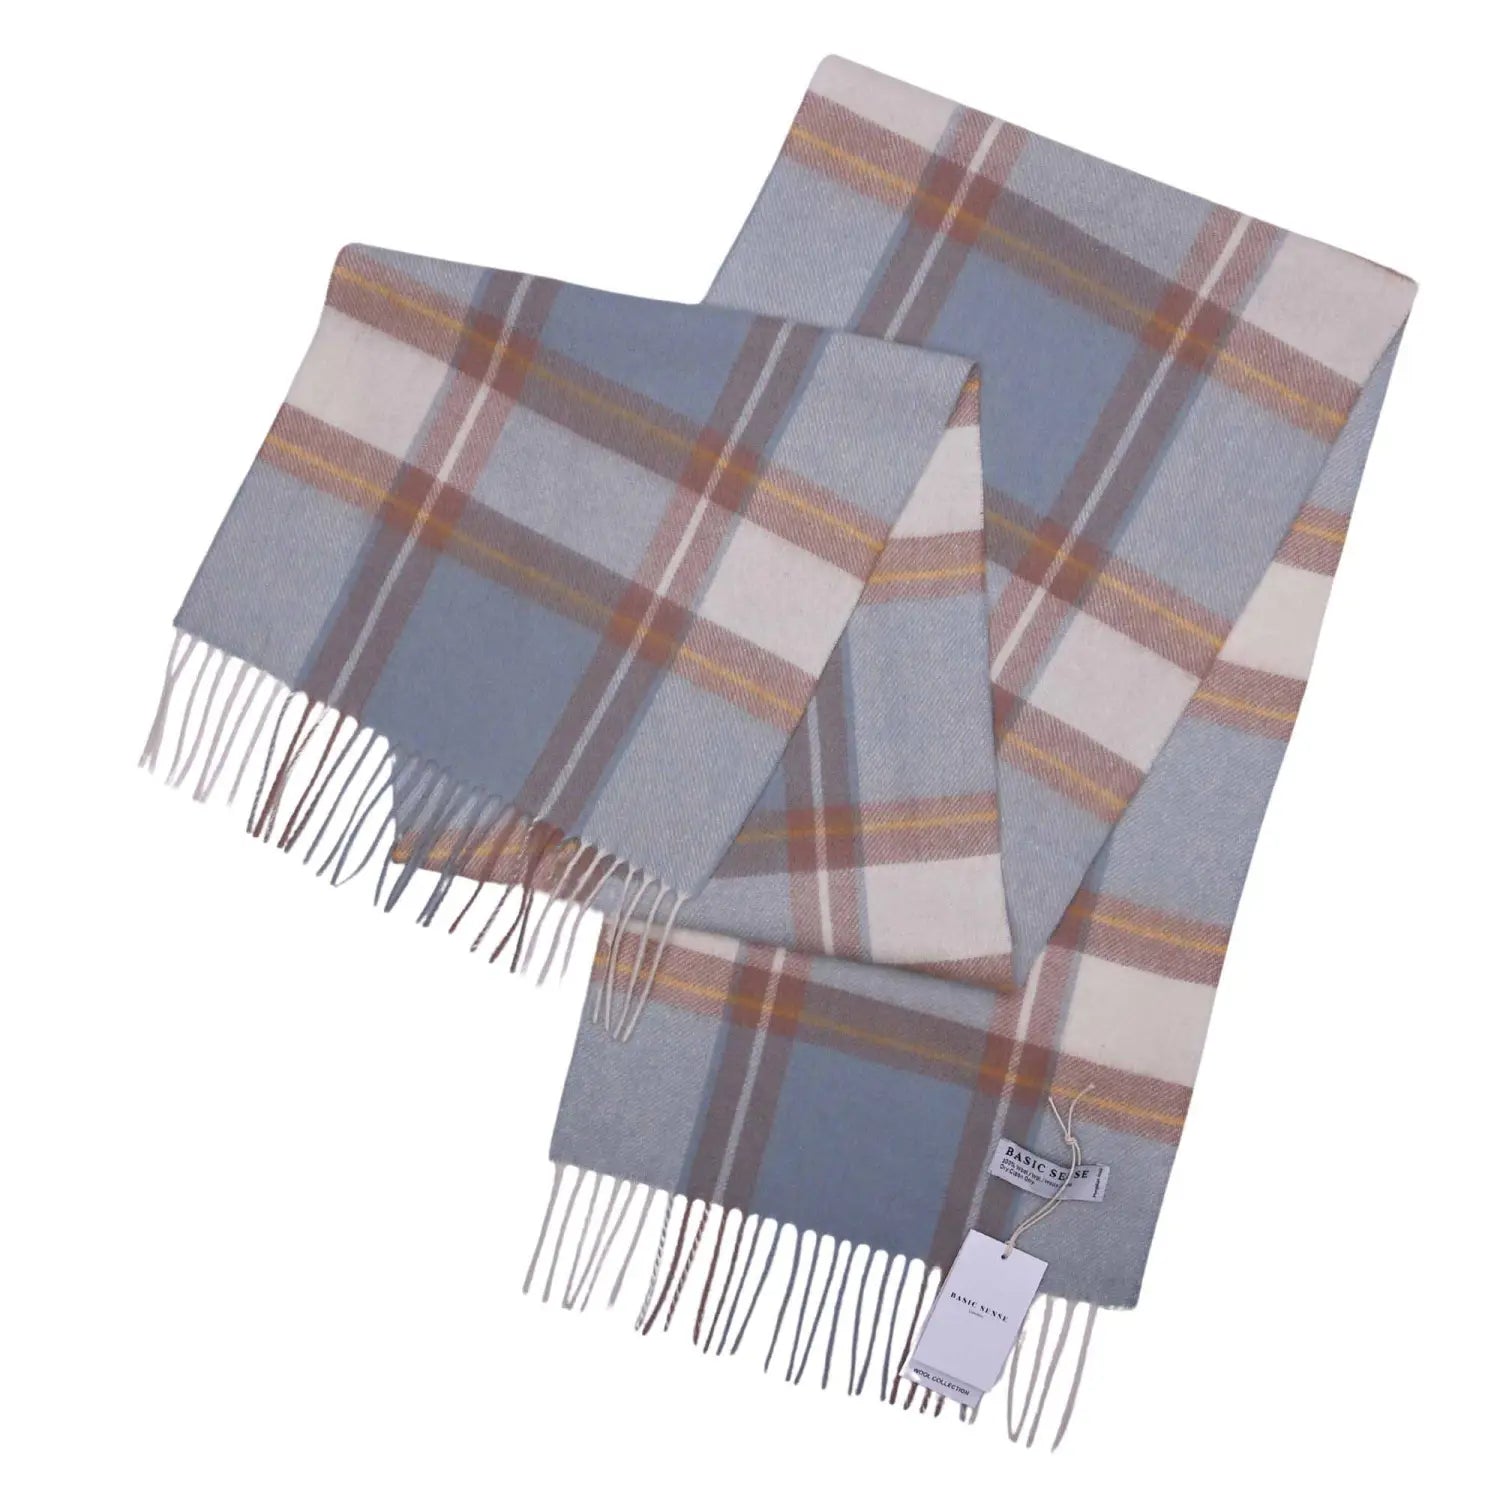 A neatly folded scarf with pale blue and soft beige plaids, accented with brown lines and fringes at the ends, tagged with a label, lying on a flat, light-colored surface.